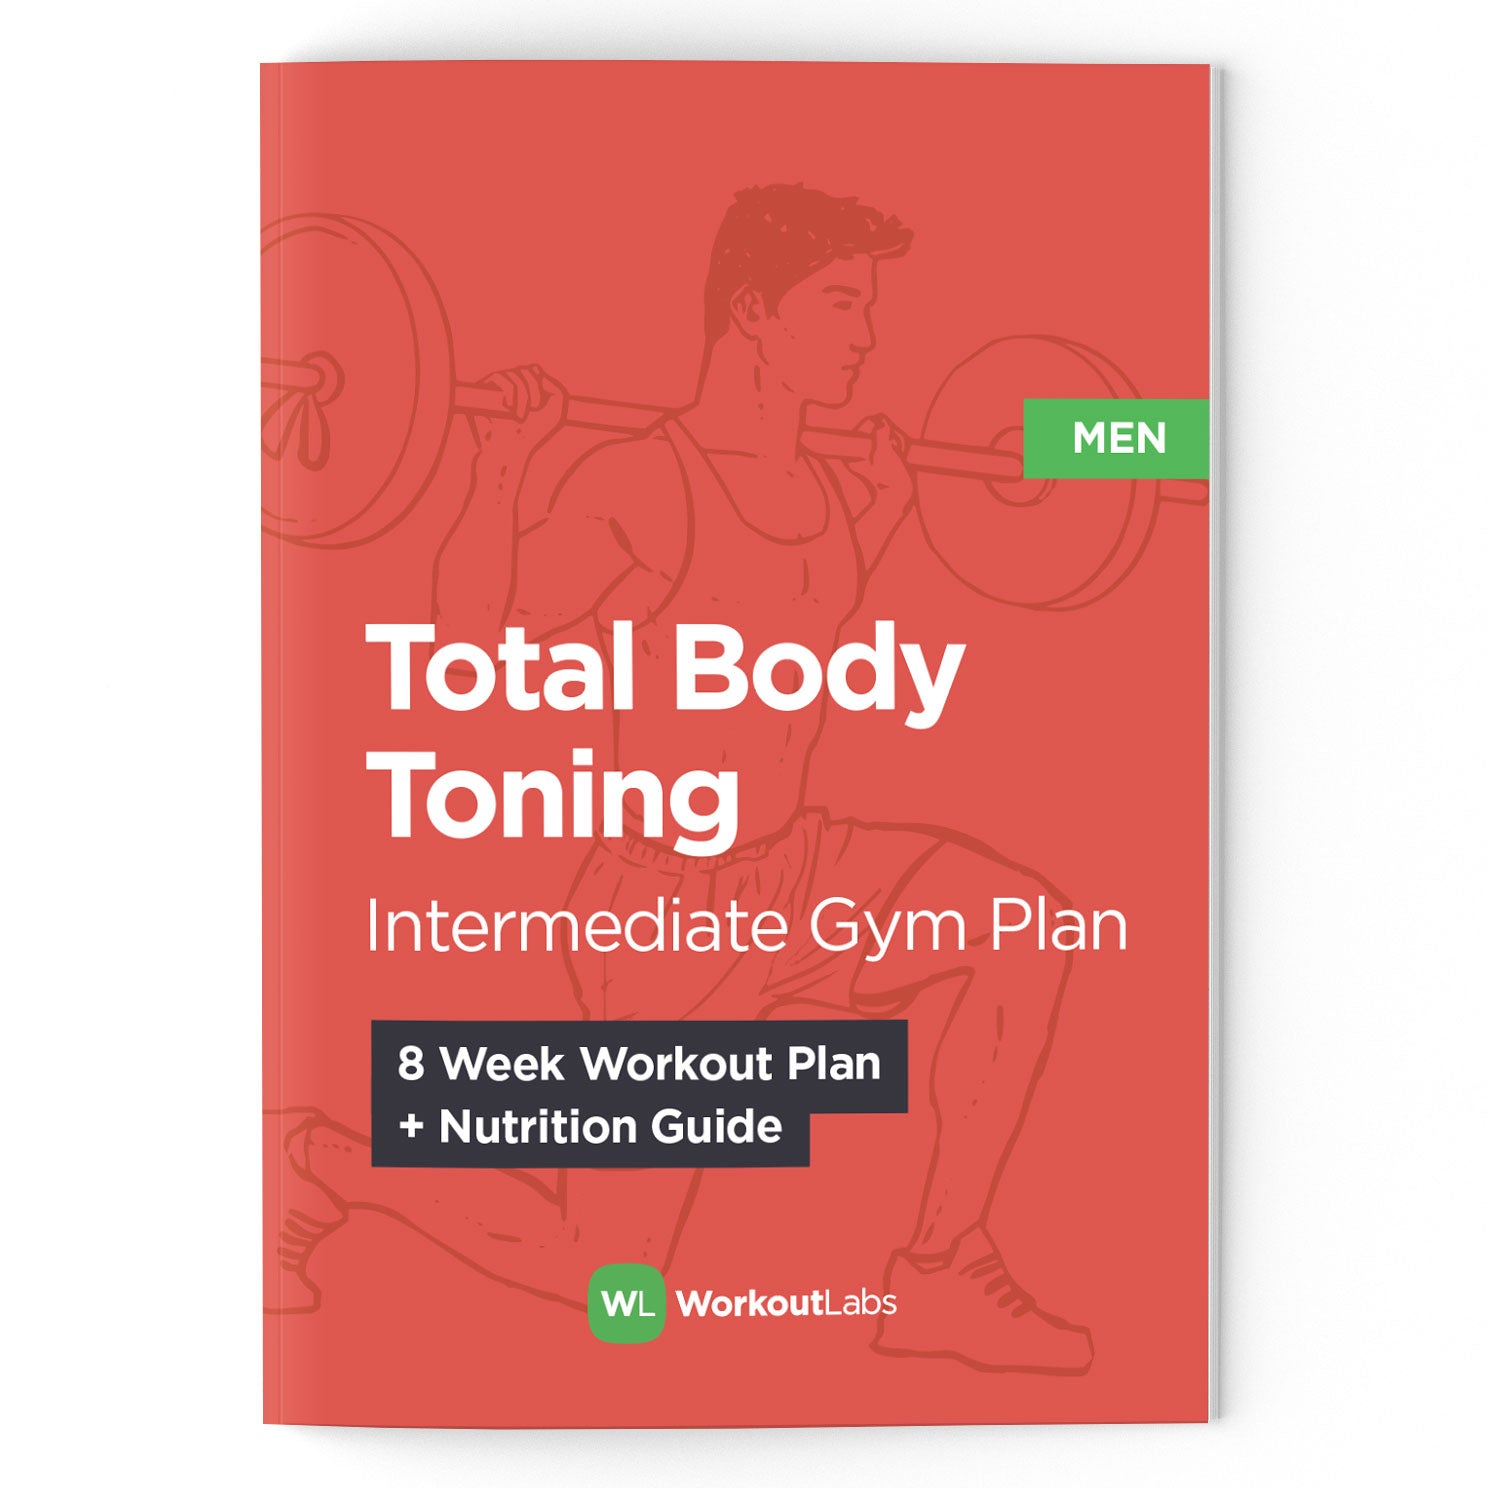 Total Body Toning: Intermediate Gym Plan & Nutrition Guide